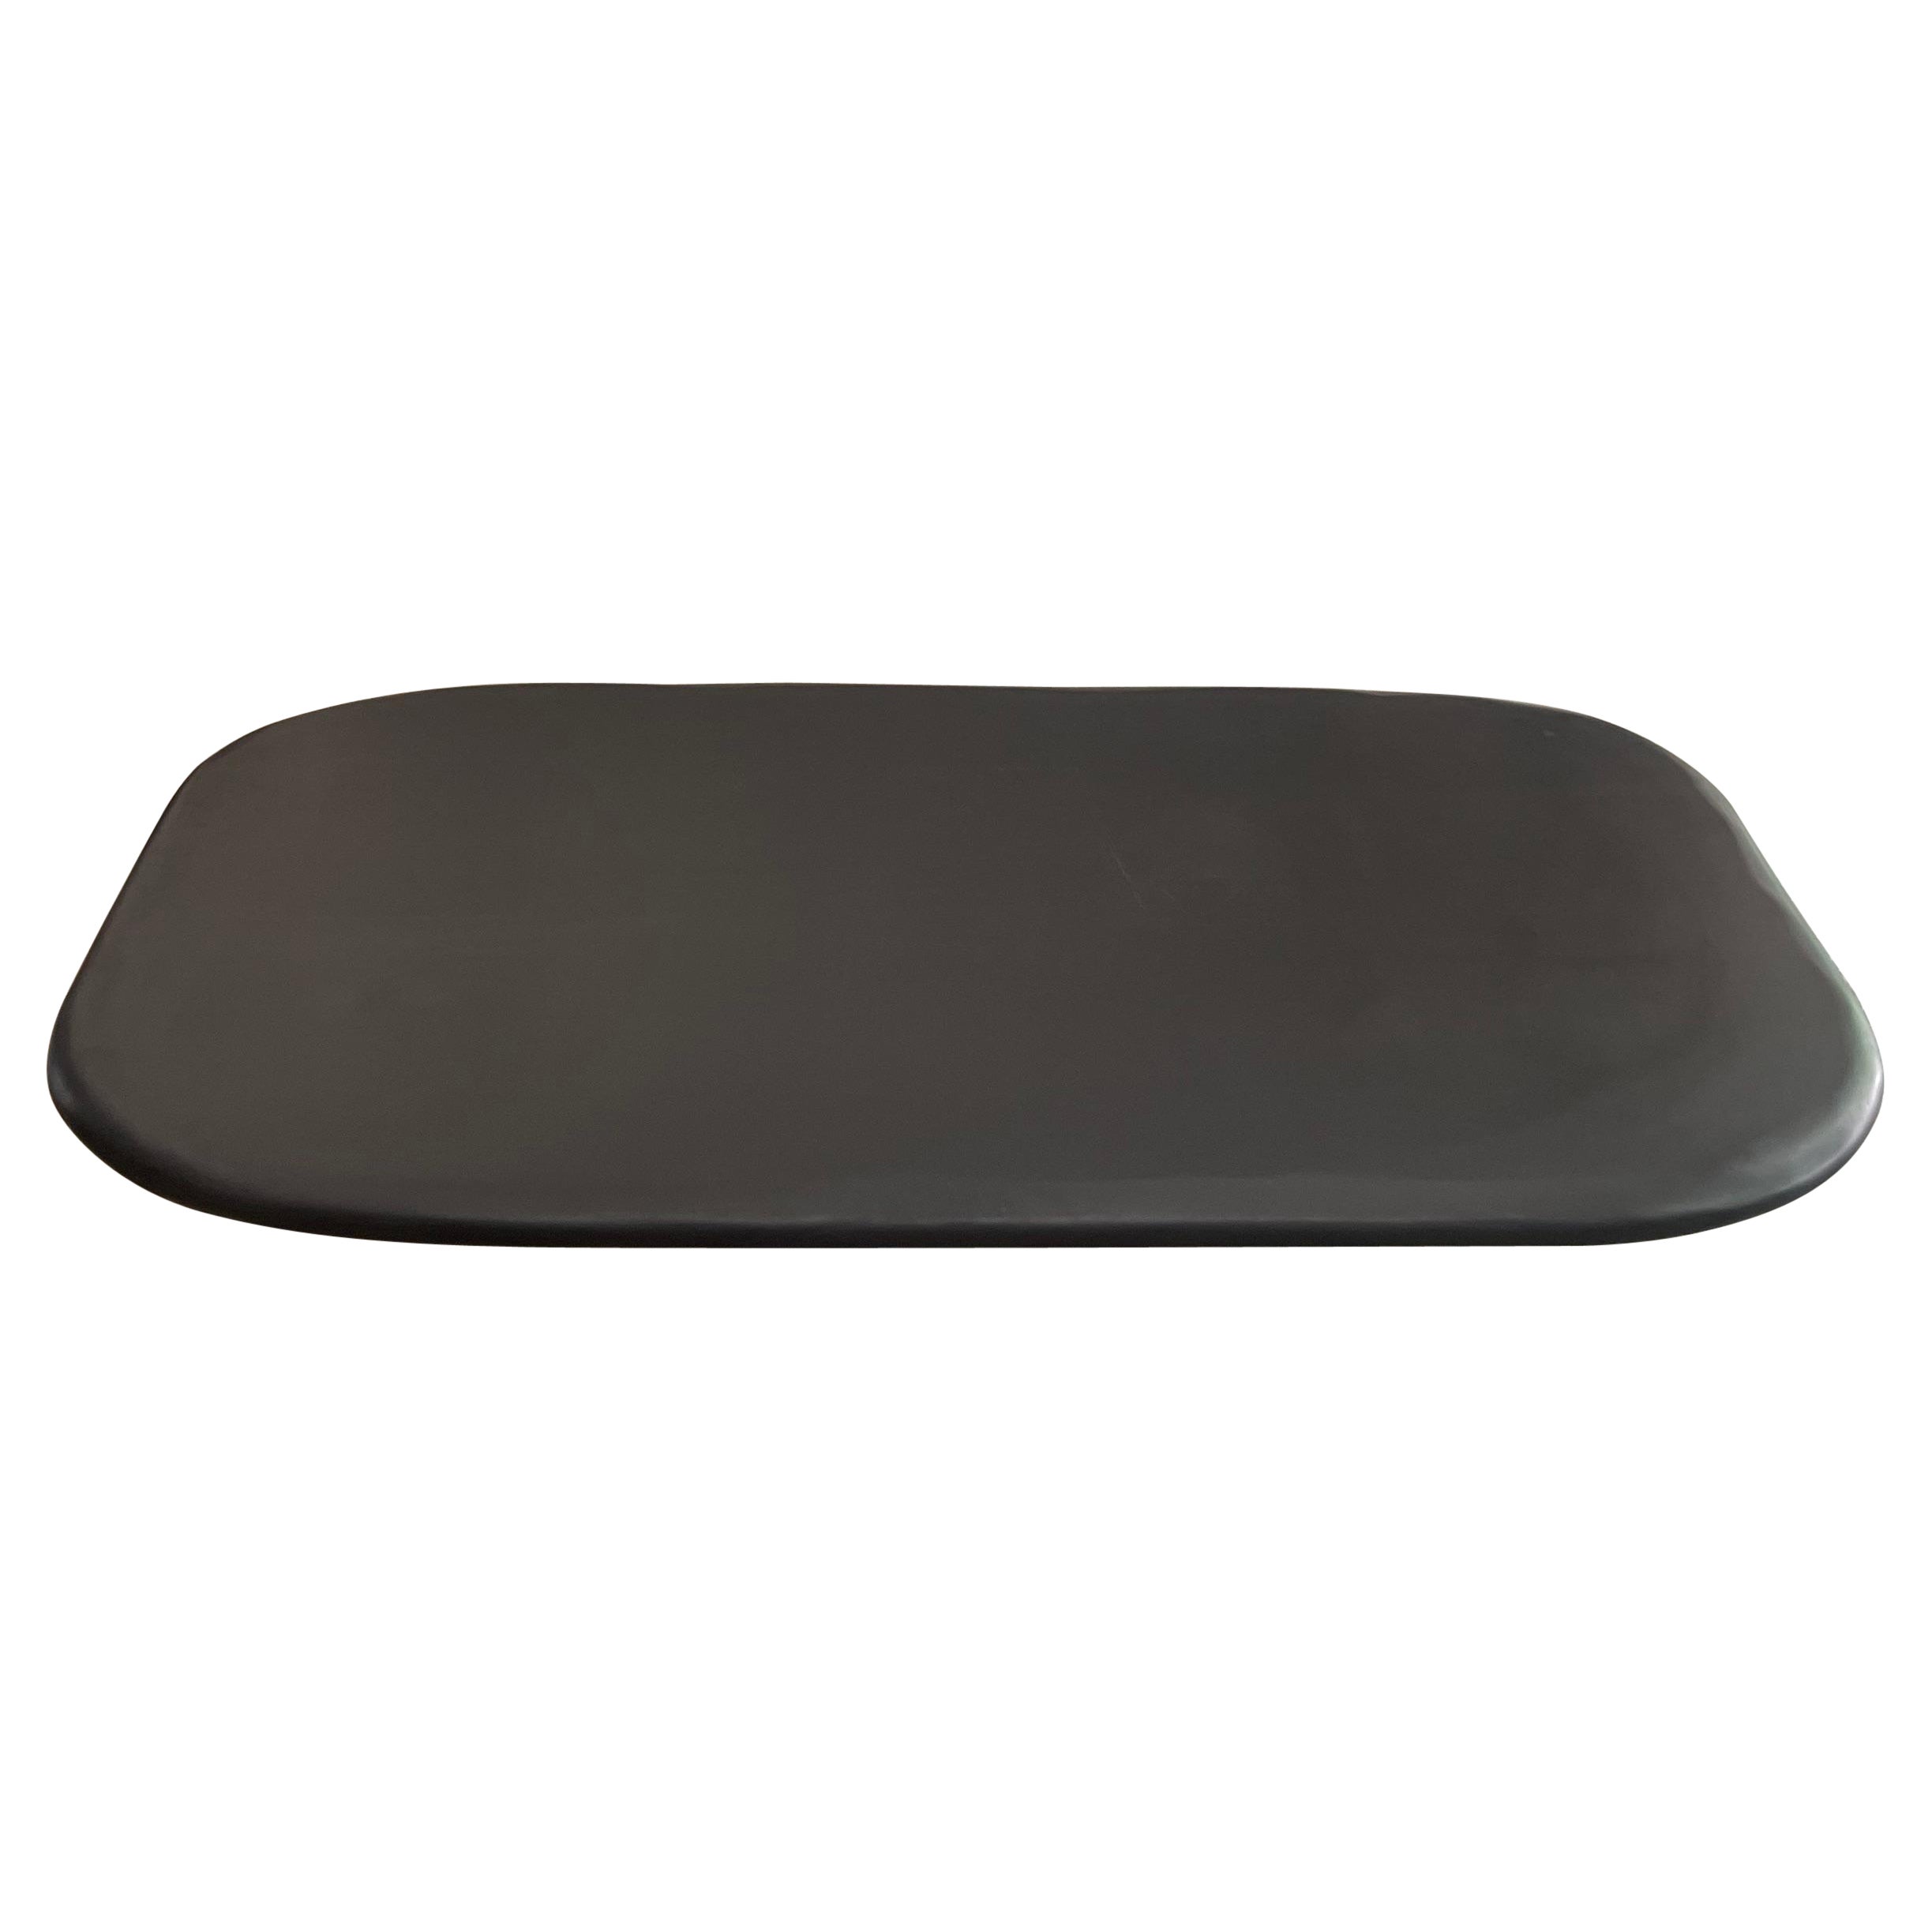 Pebble Table, Matte Black Stone Table with Rounded Edge and Base For Sale